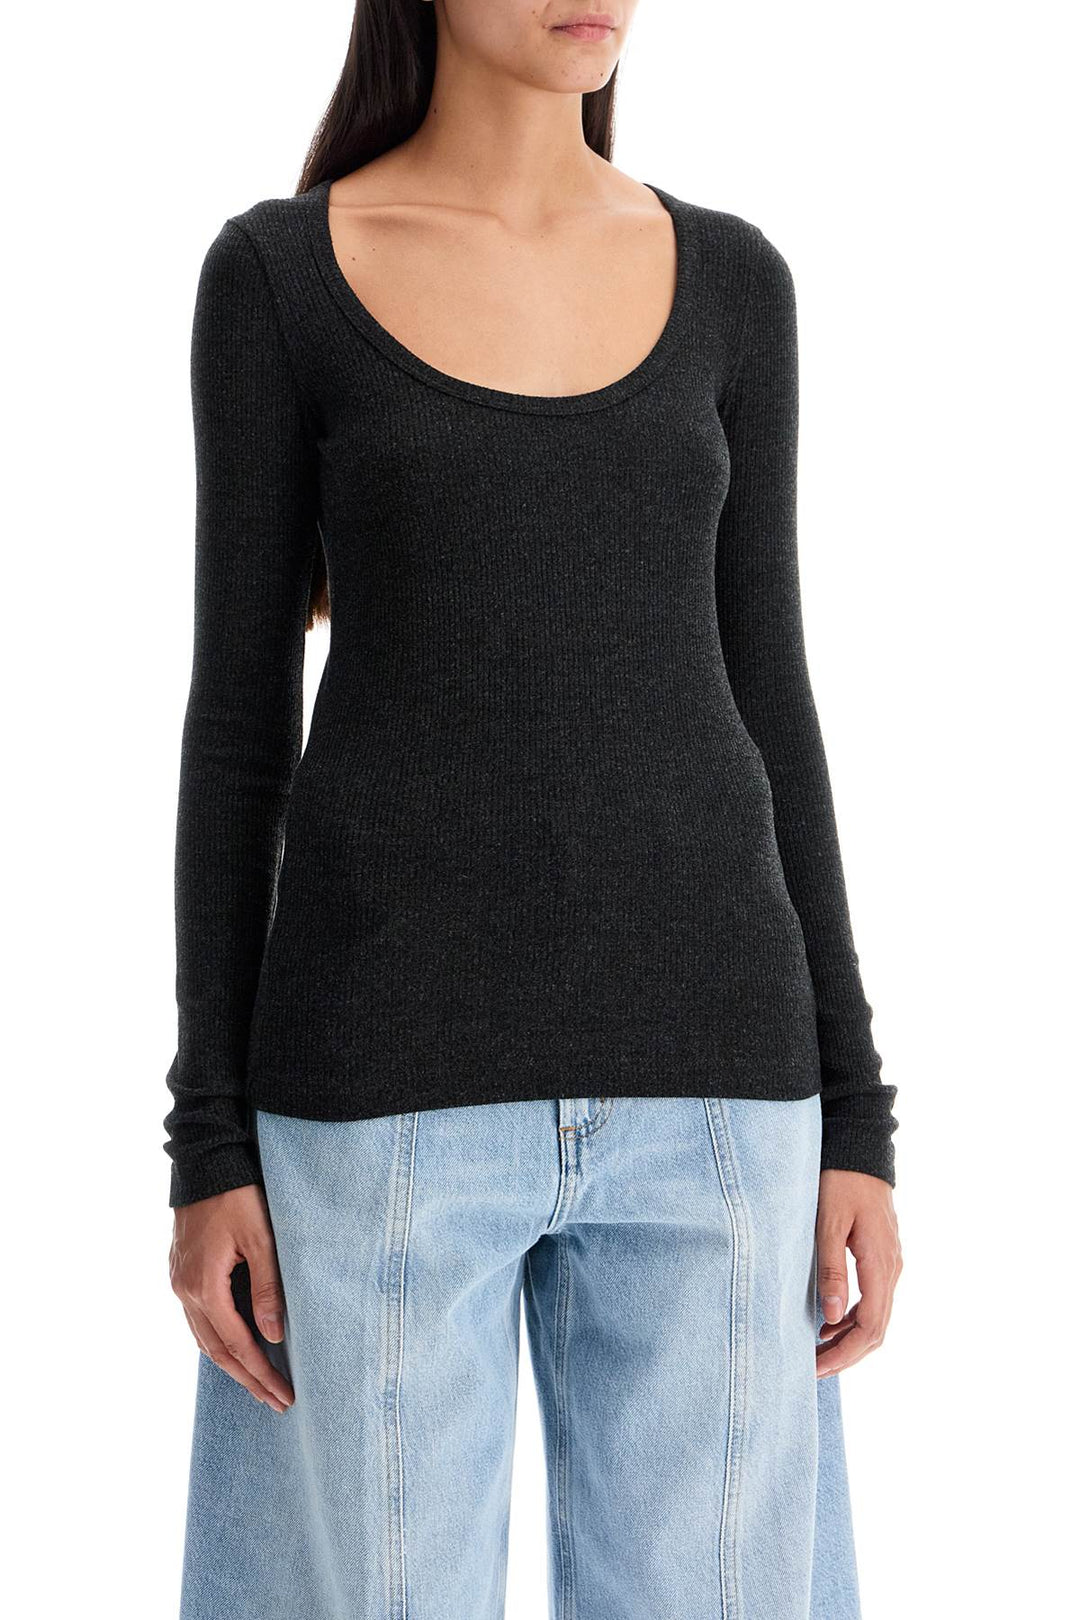 Agolde Fitted Top With Deep Neckline   Black